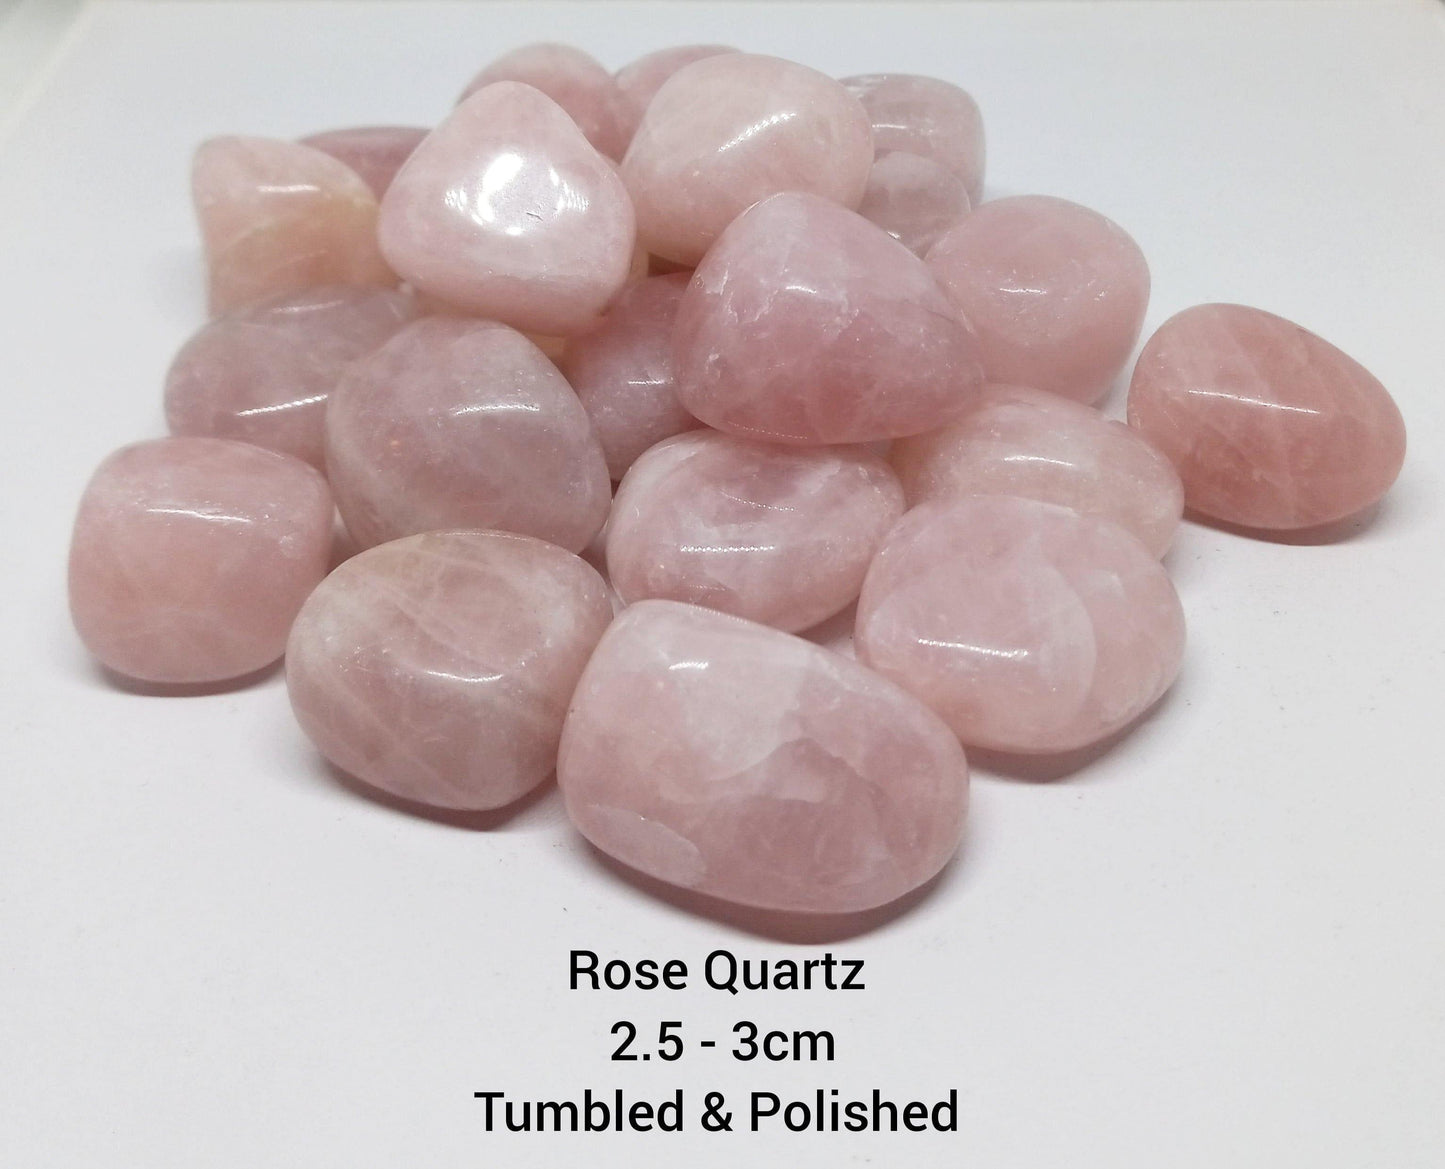 Rose Quartz Raw Rough Brazil Mined Natural Crystal Gemstone Chunk 1.5 - 2 inch - Guiding Lights Boutique